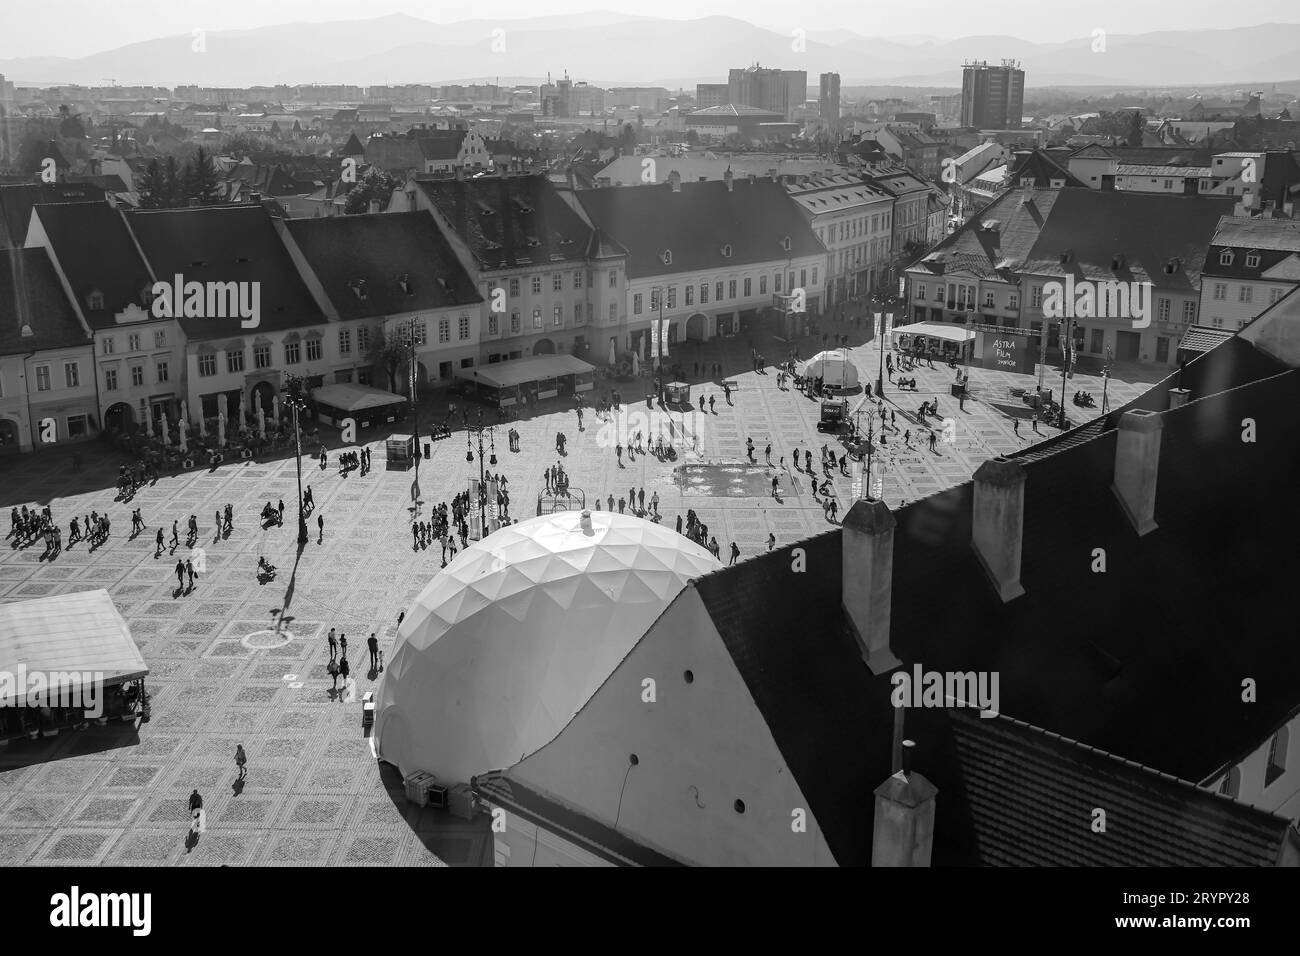 The Large Square (Piața Mare) during the Astra Film festival 2019 in black and white Stock Photo